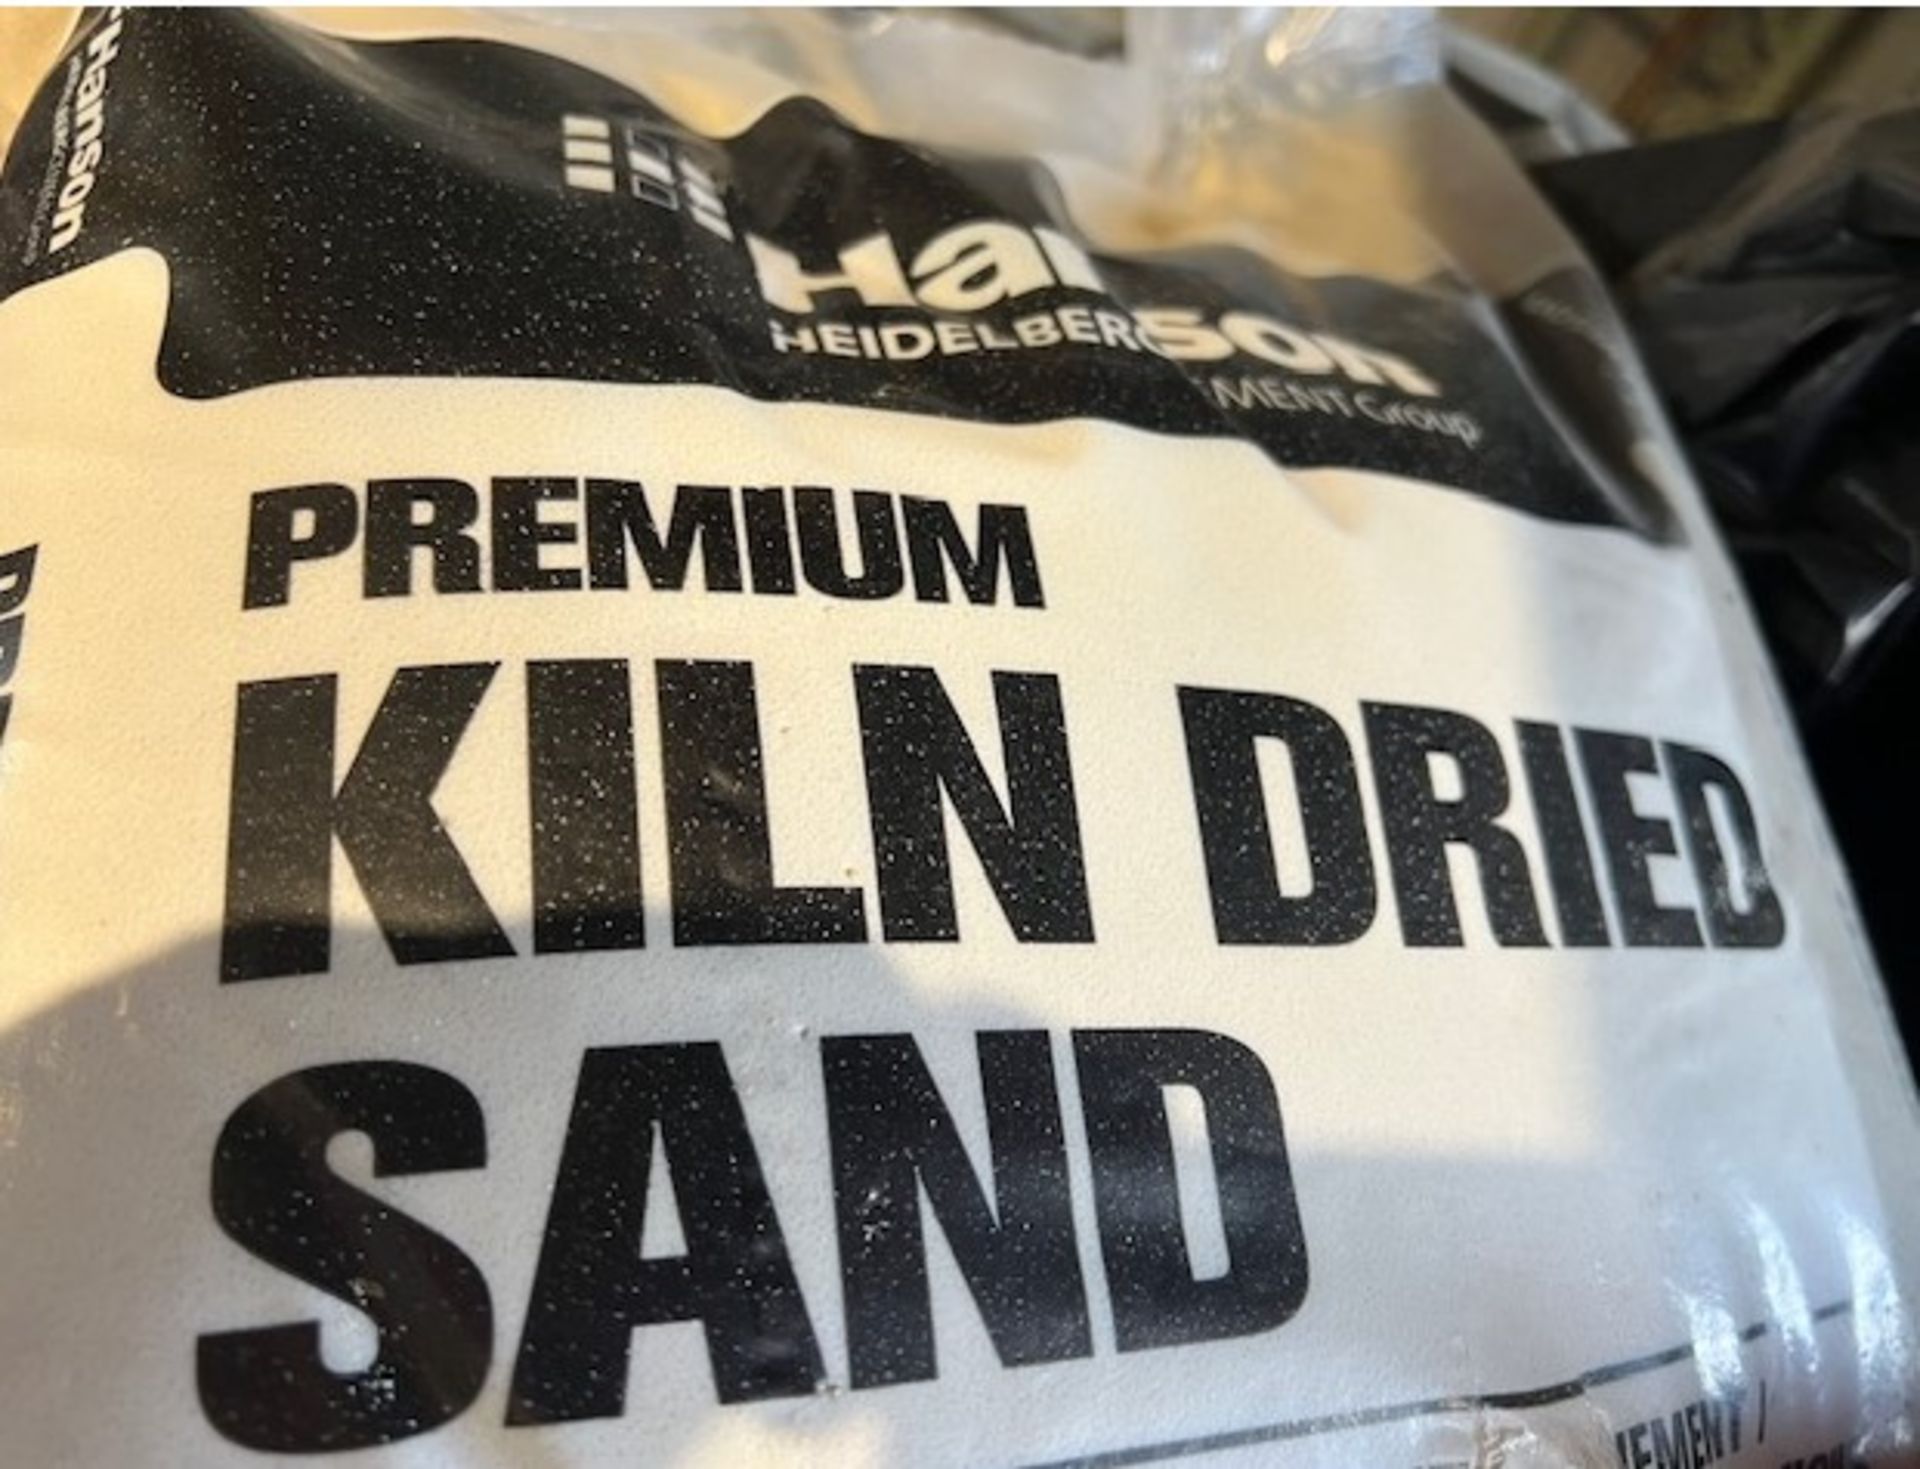 Set A608 Large Lot of Hanson Premium Kiln Dried Sand Bags (Pallet and a Half) - Image 2 of 2